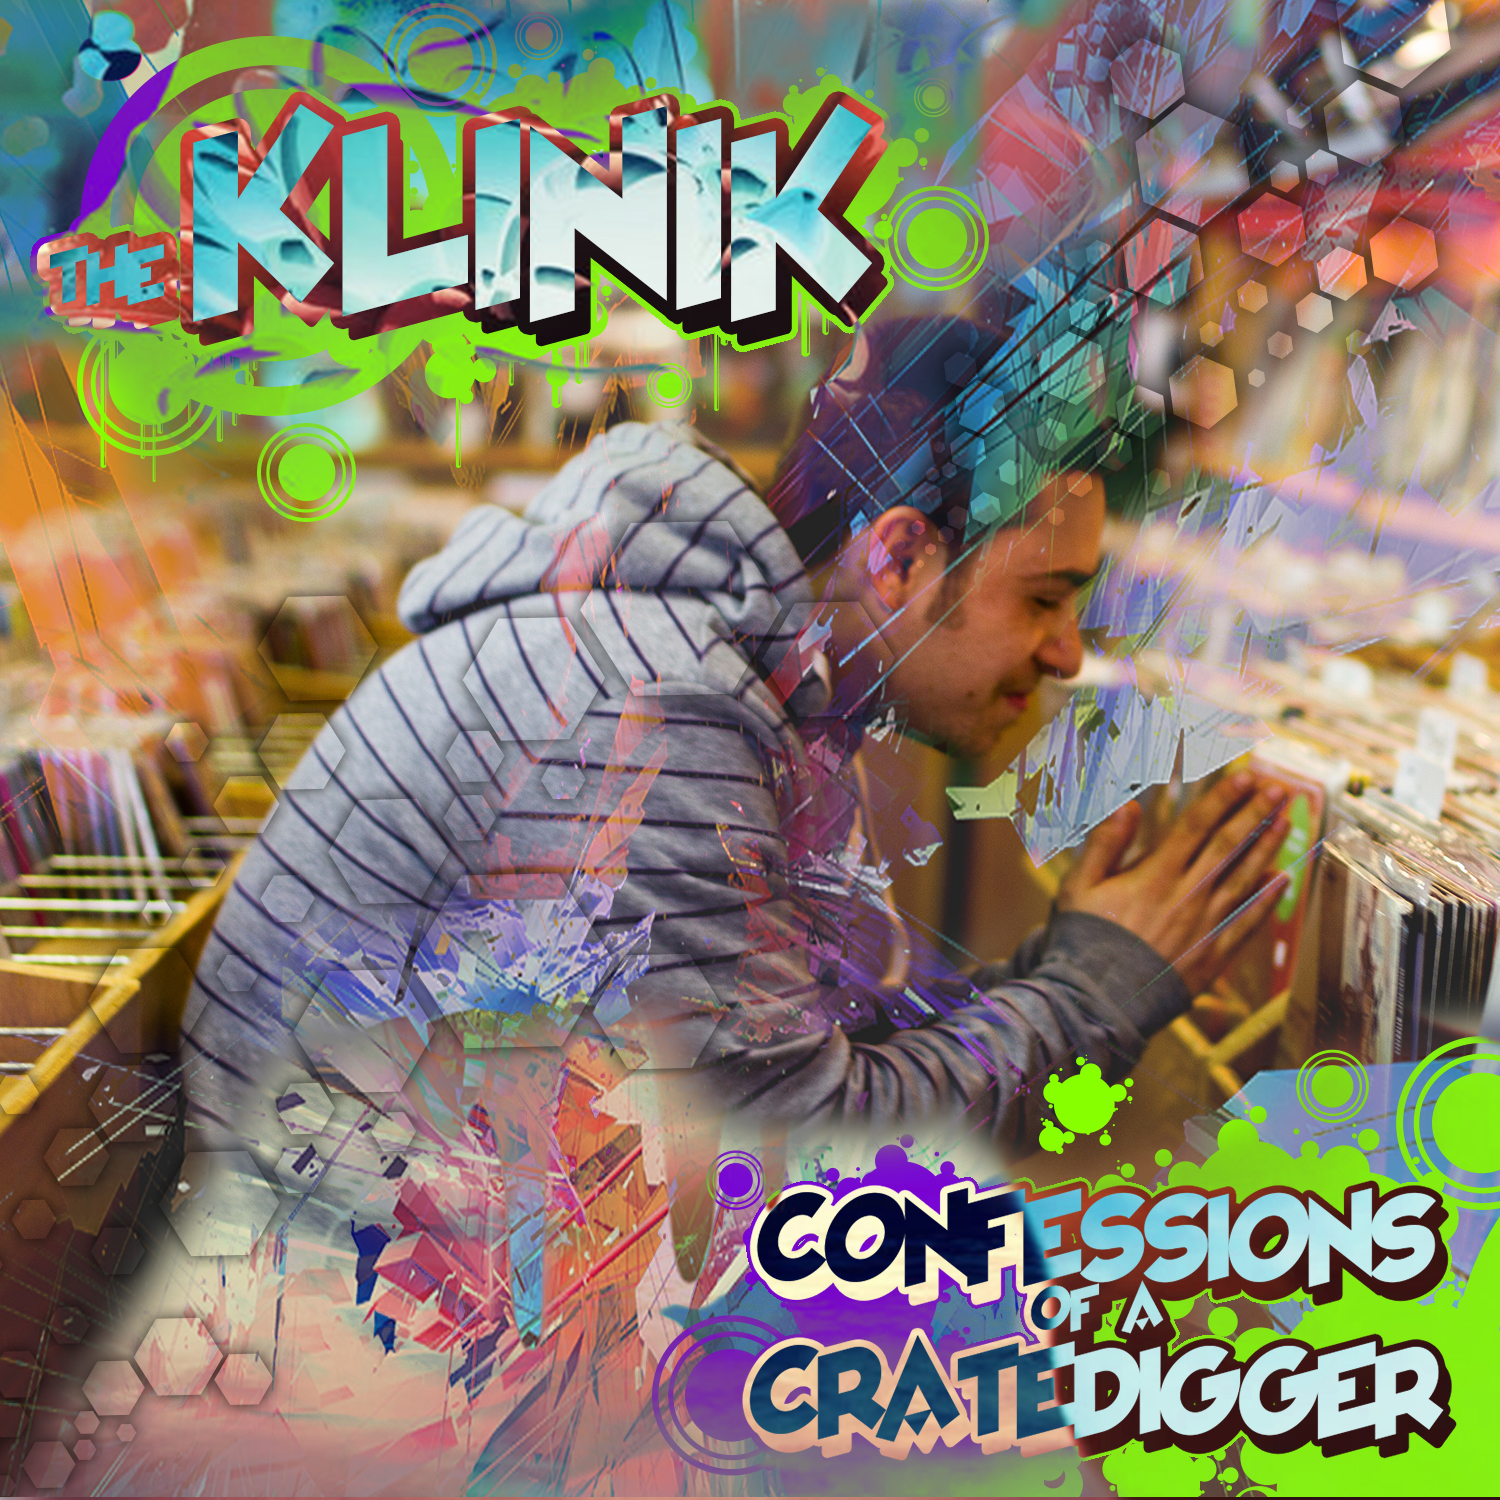 The Klinik "Confessions Of A Cratedigger" Release | @soulutioncrew